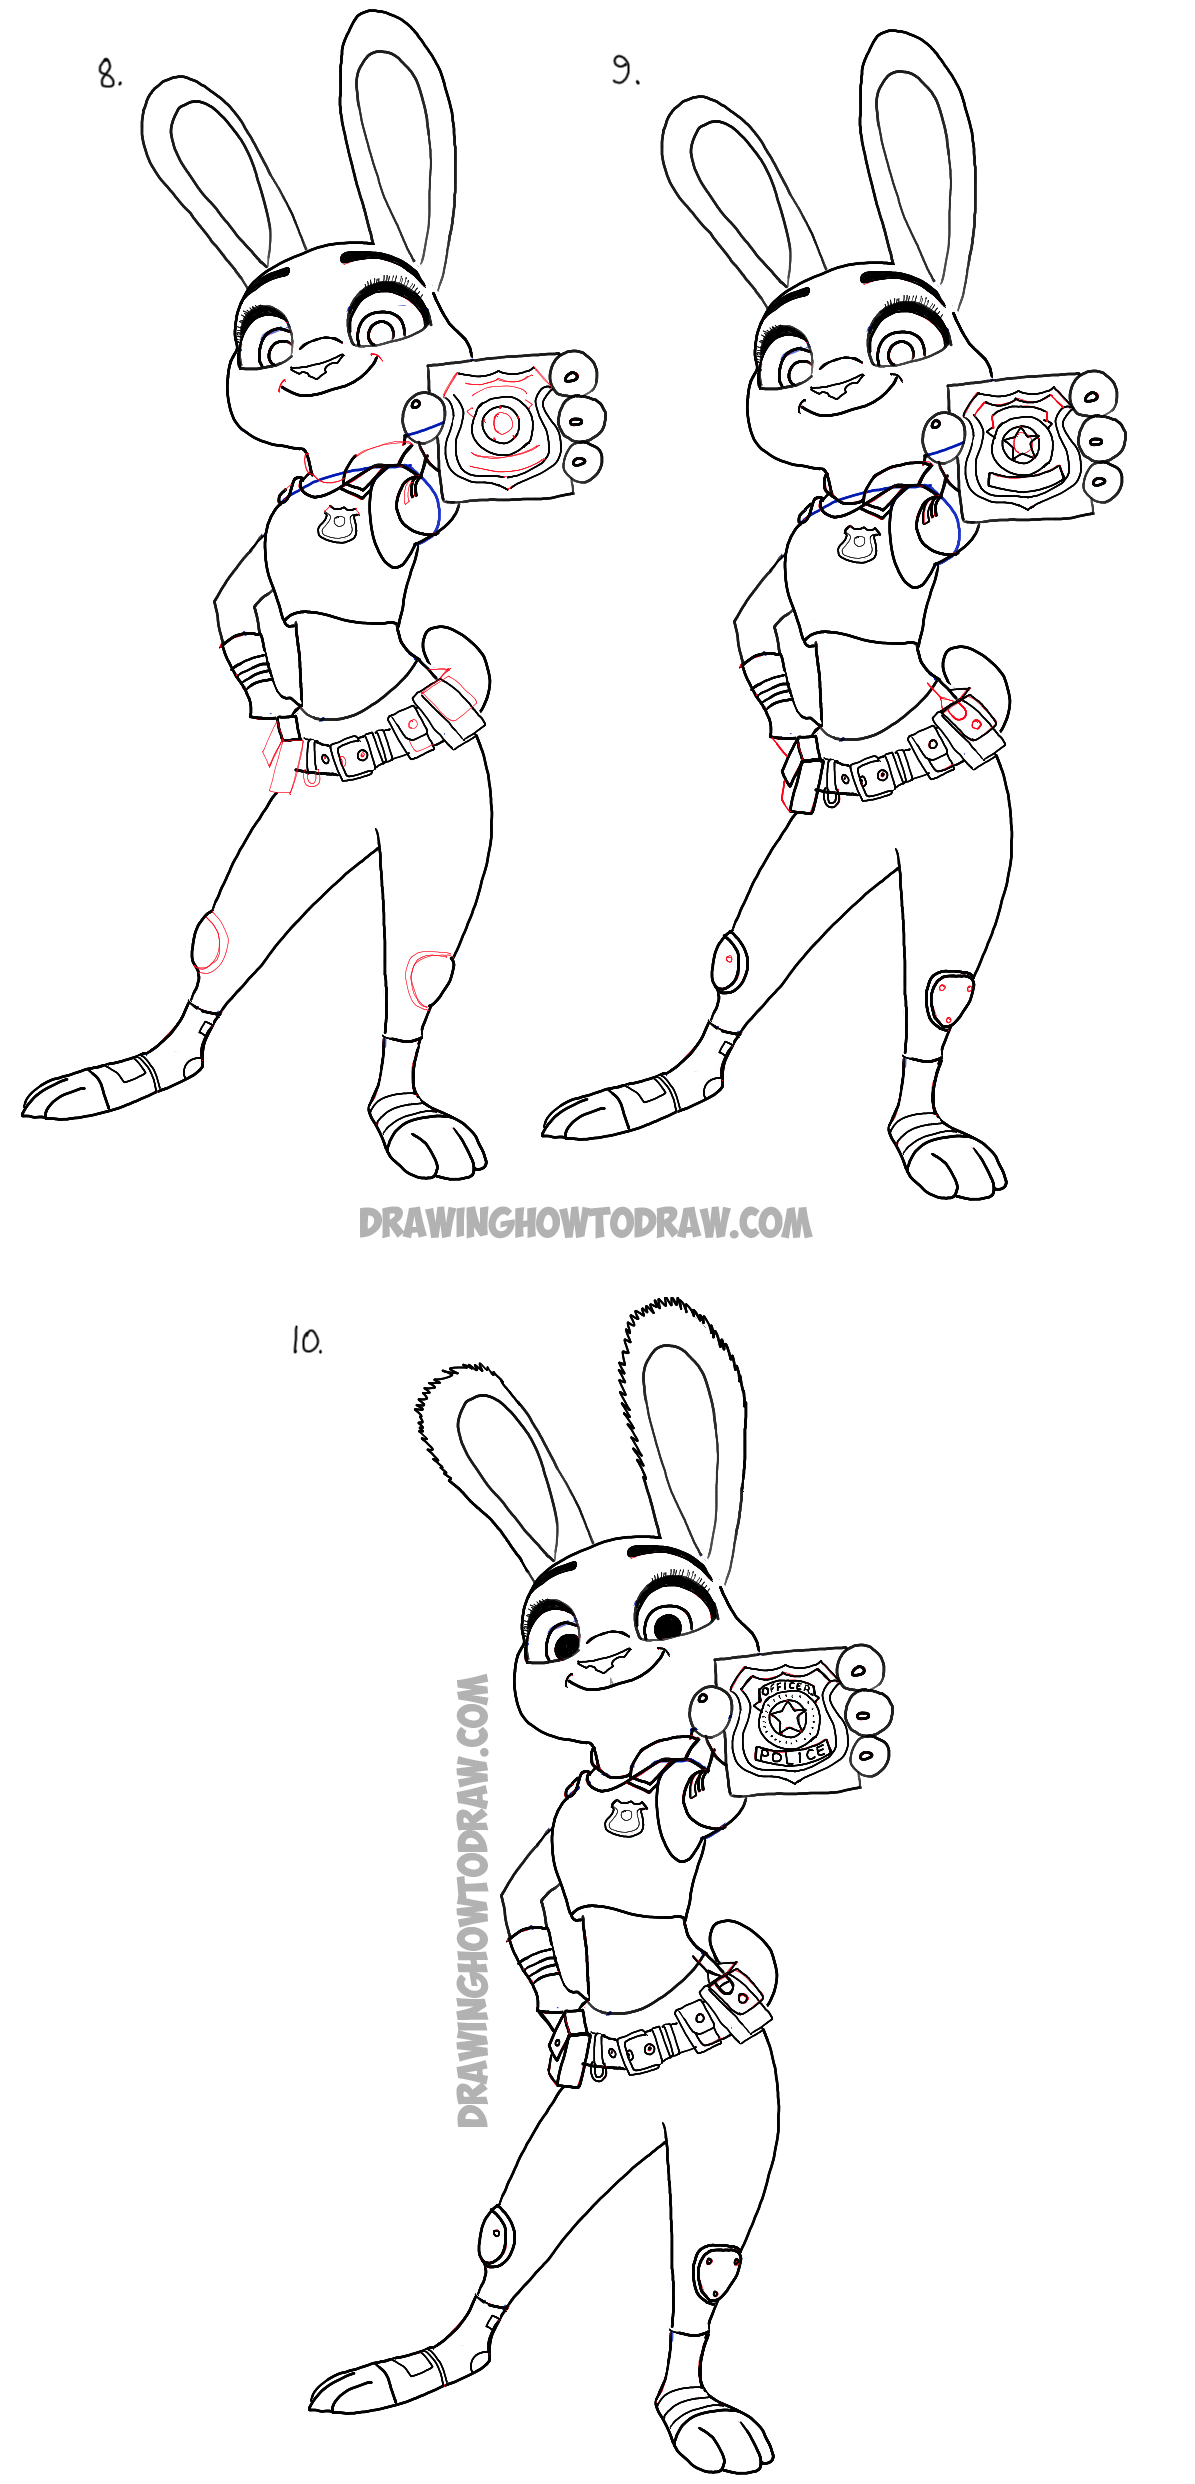 How to Draw Judy Hopps from Zootopia : Easy Step by Step Drawing